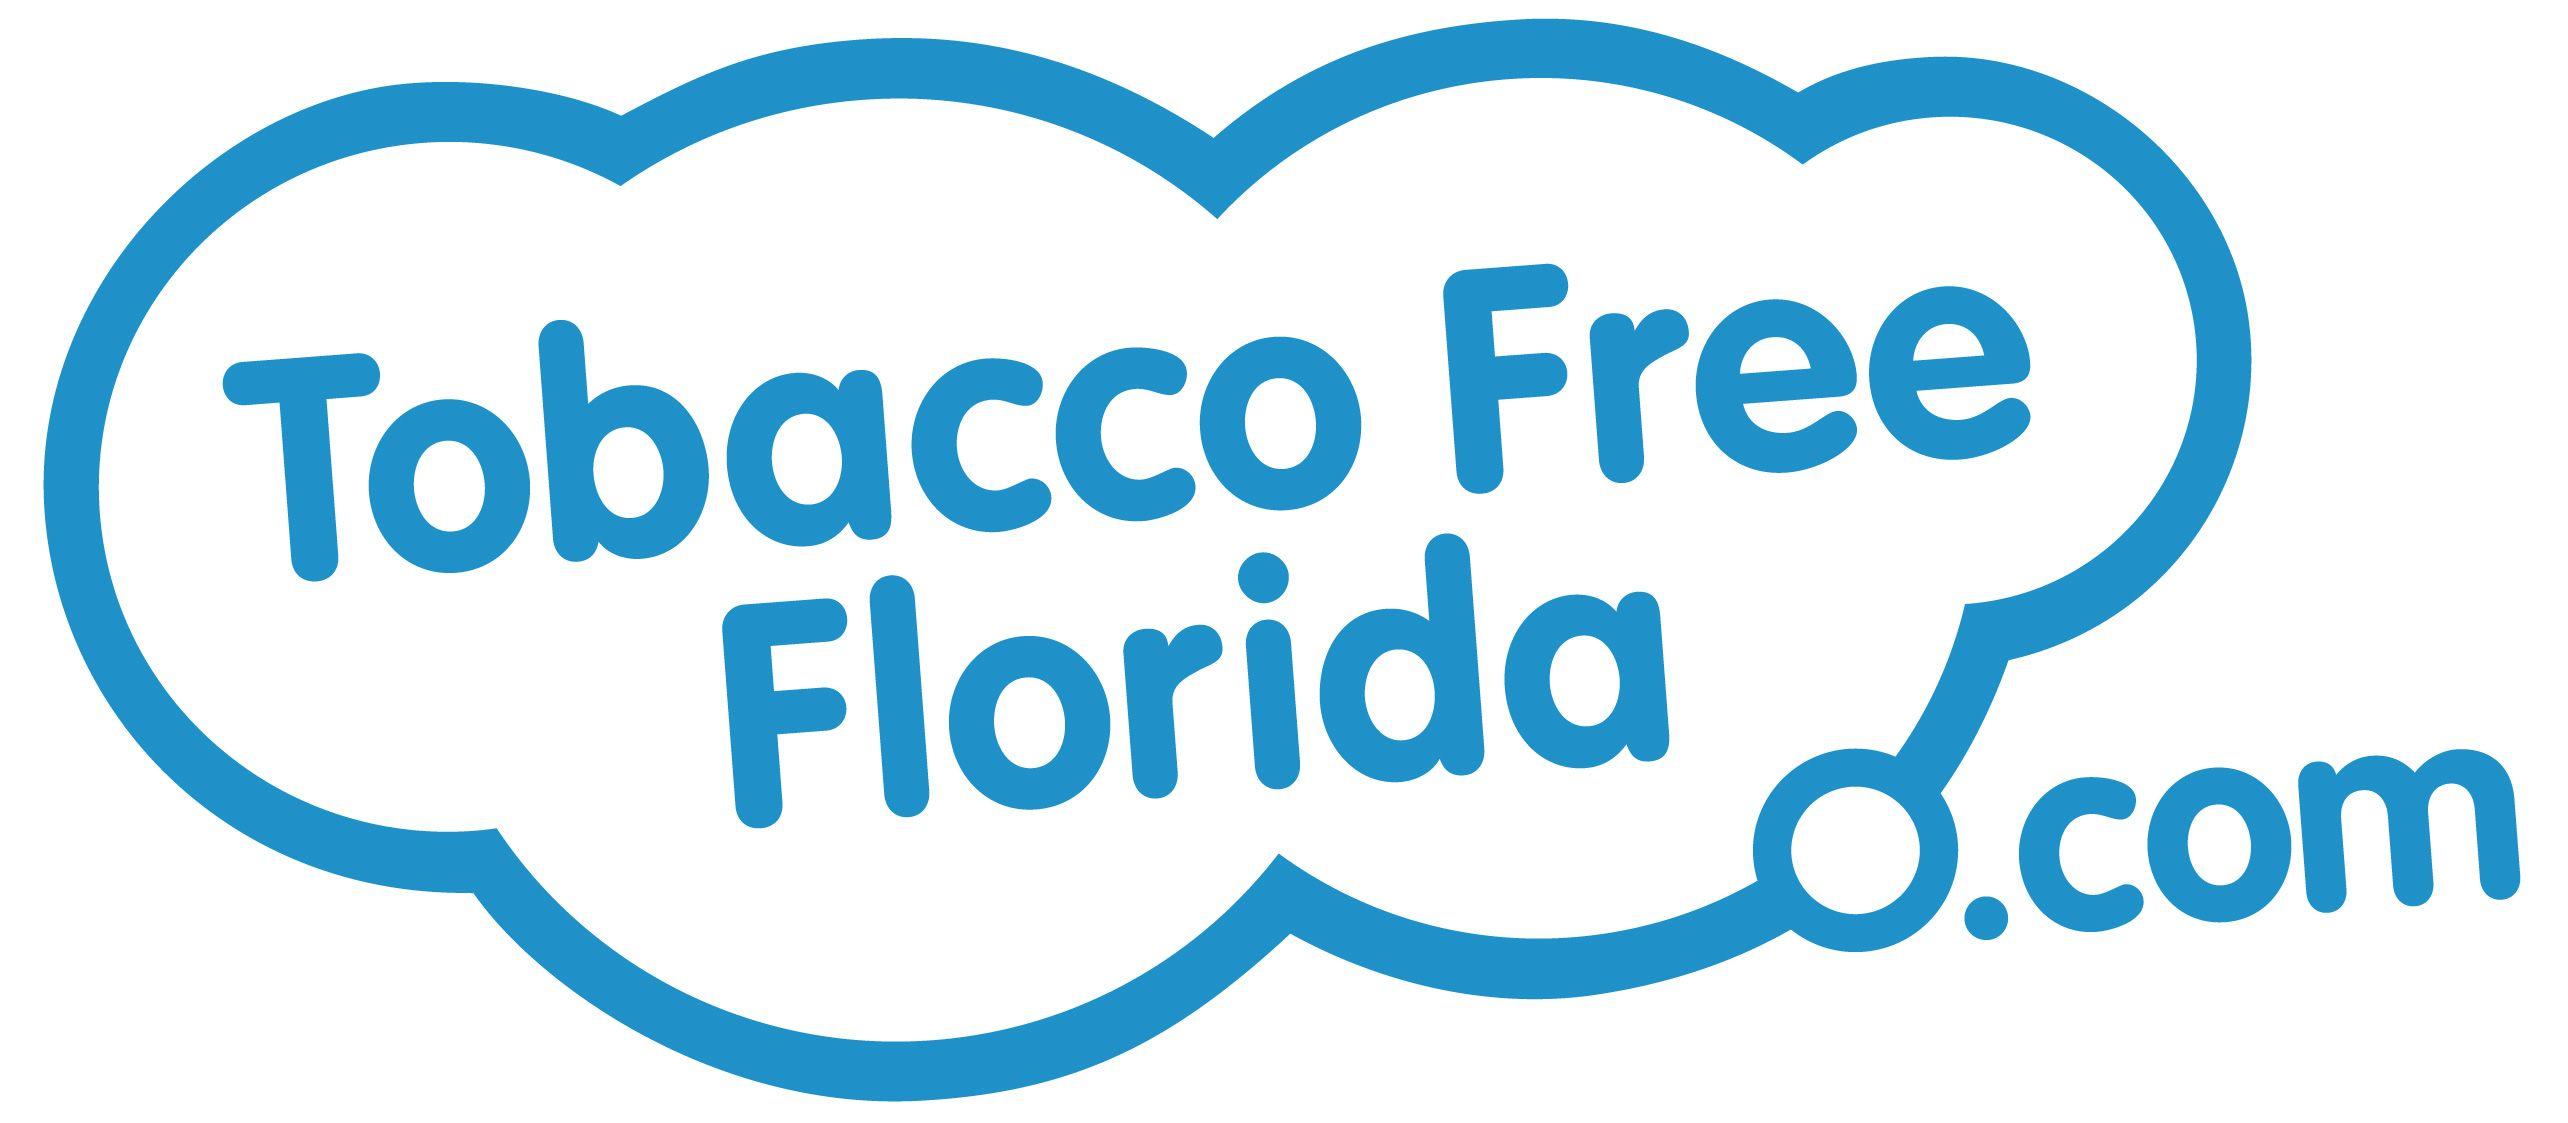 Smoke-Free Logo - Florida Tobacco Use At All Time Low, But Health Advocates Wary Of E